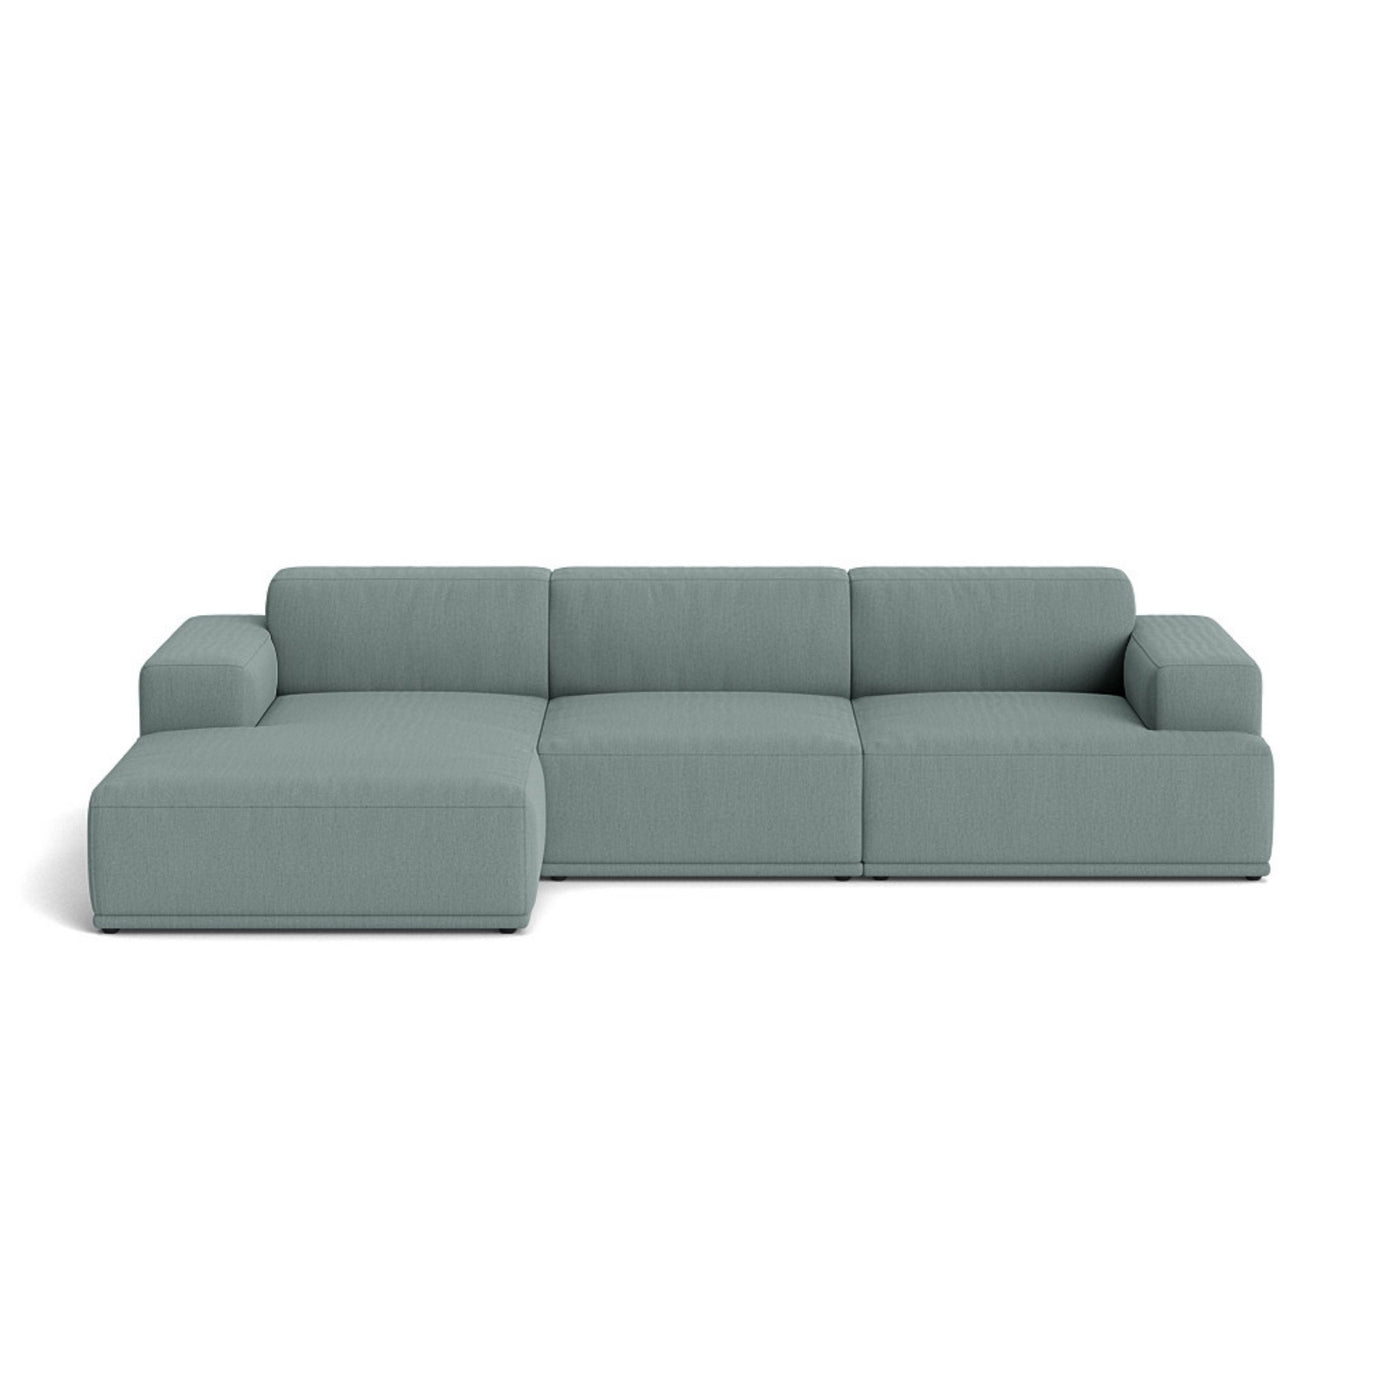 Muuto Connect Soft Modular 3 Seater Sofa, configuration 2. Made-to-order from someday designs. #colour_re-wool-868